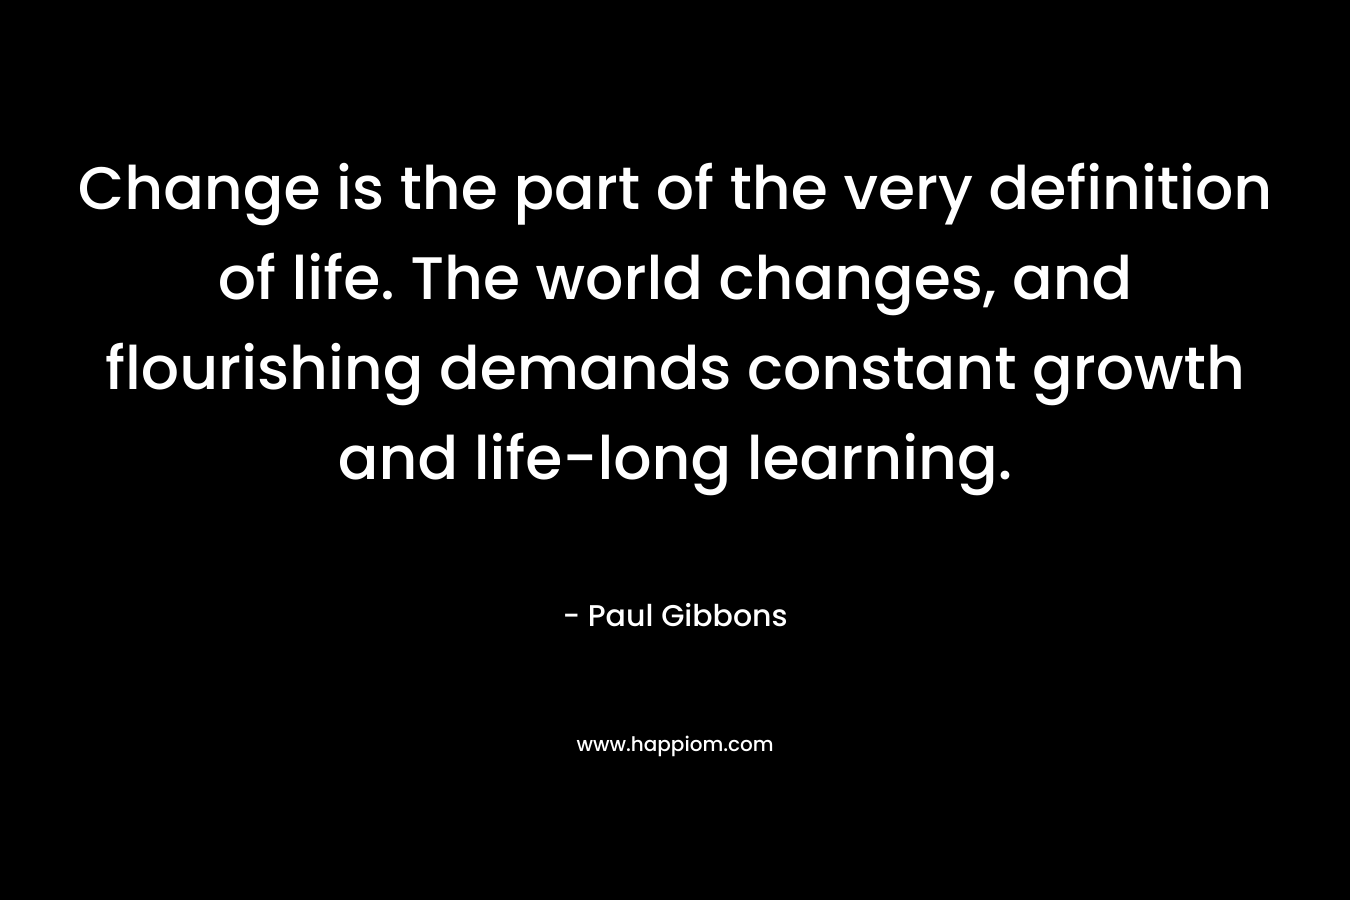 Change is the part of the very definition of life. The world changes, and flourishing demands constant growth and life-long learning.